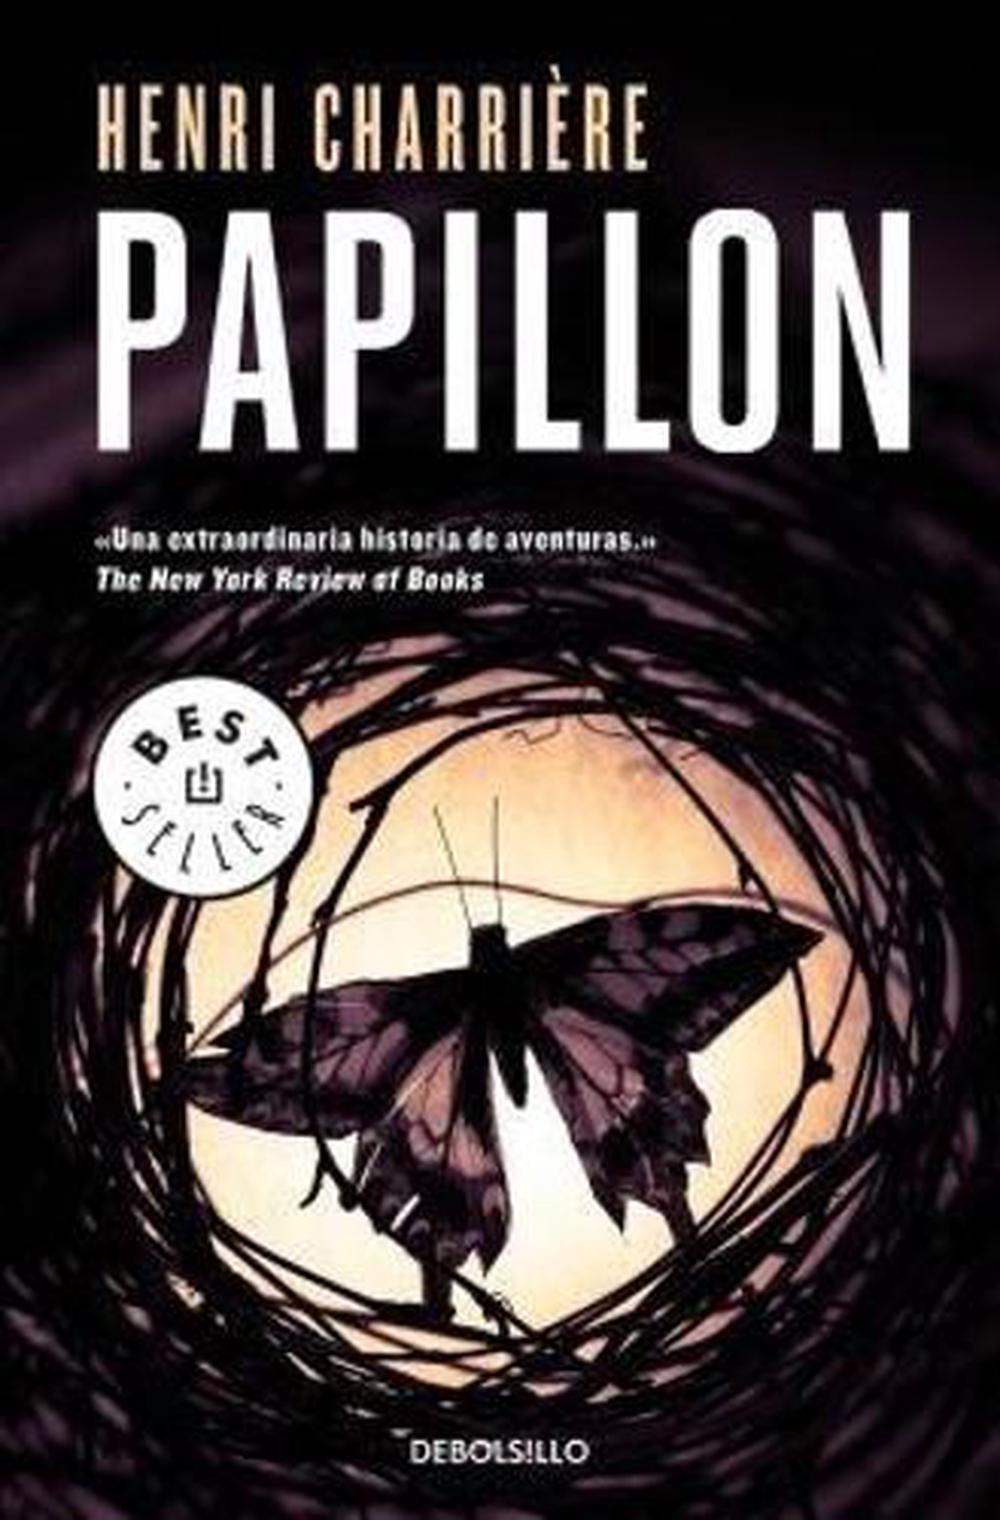 Papillon (Spanish Edition) by Henri Charriere (Spanish ...